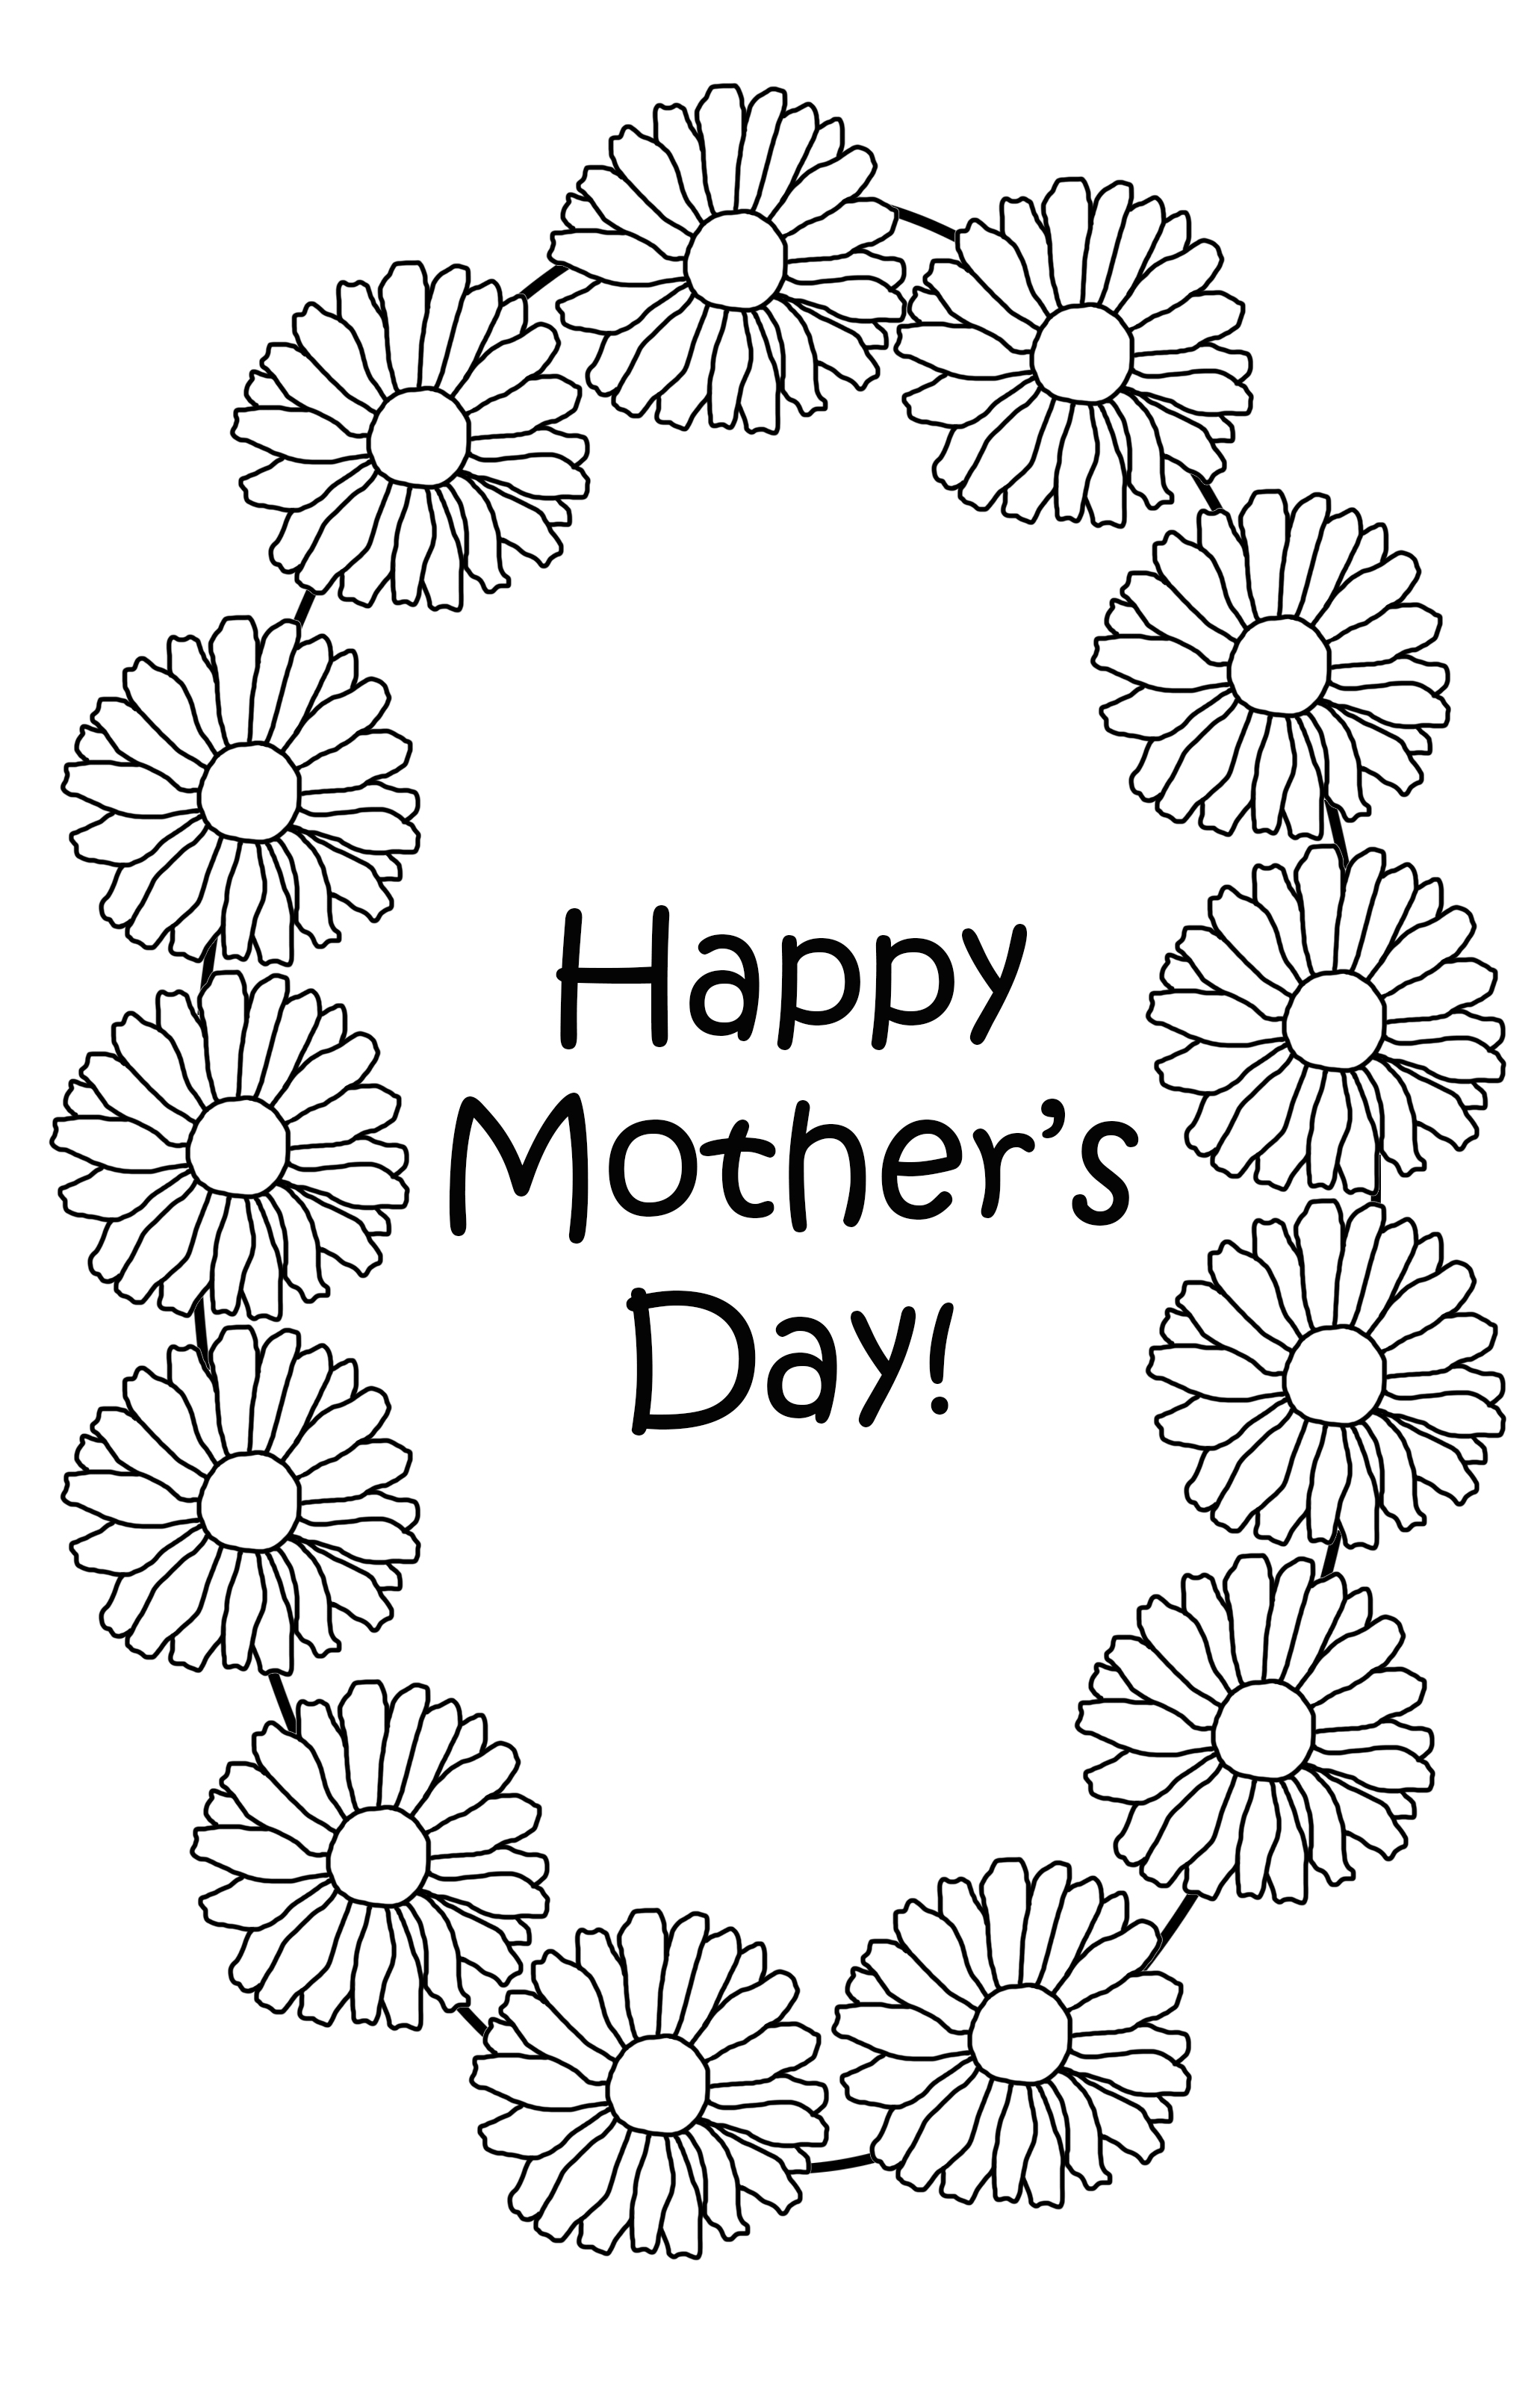 Mother's Day coloring with daisies